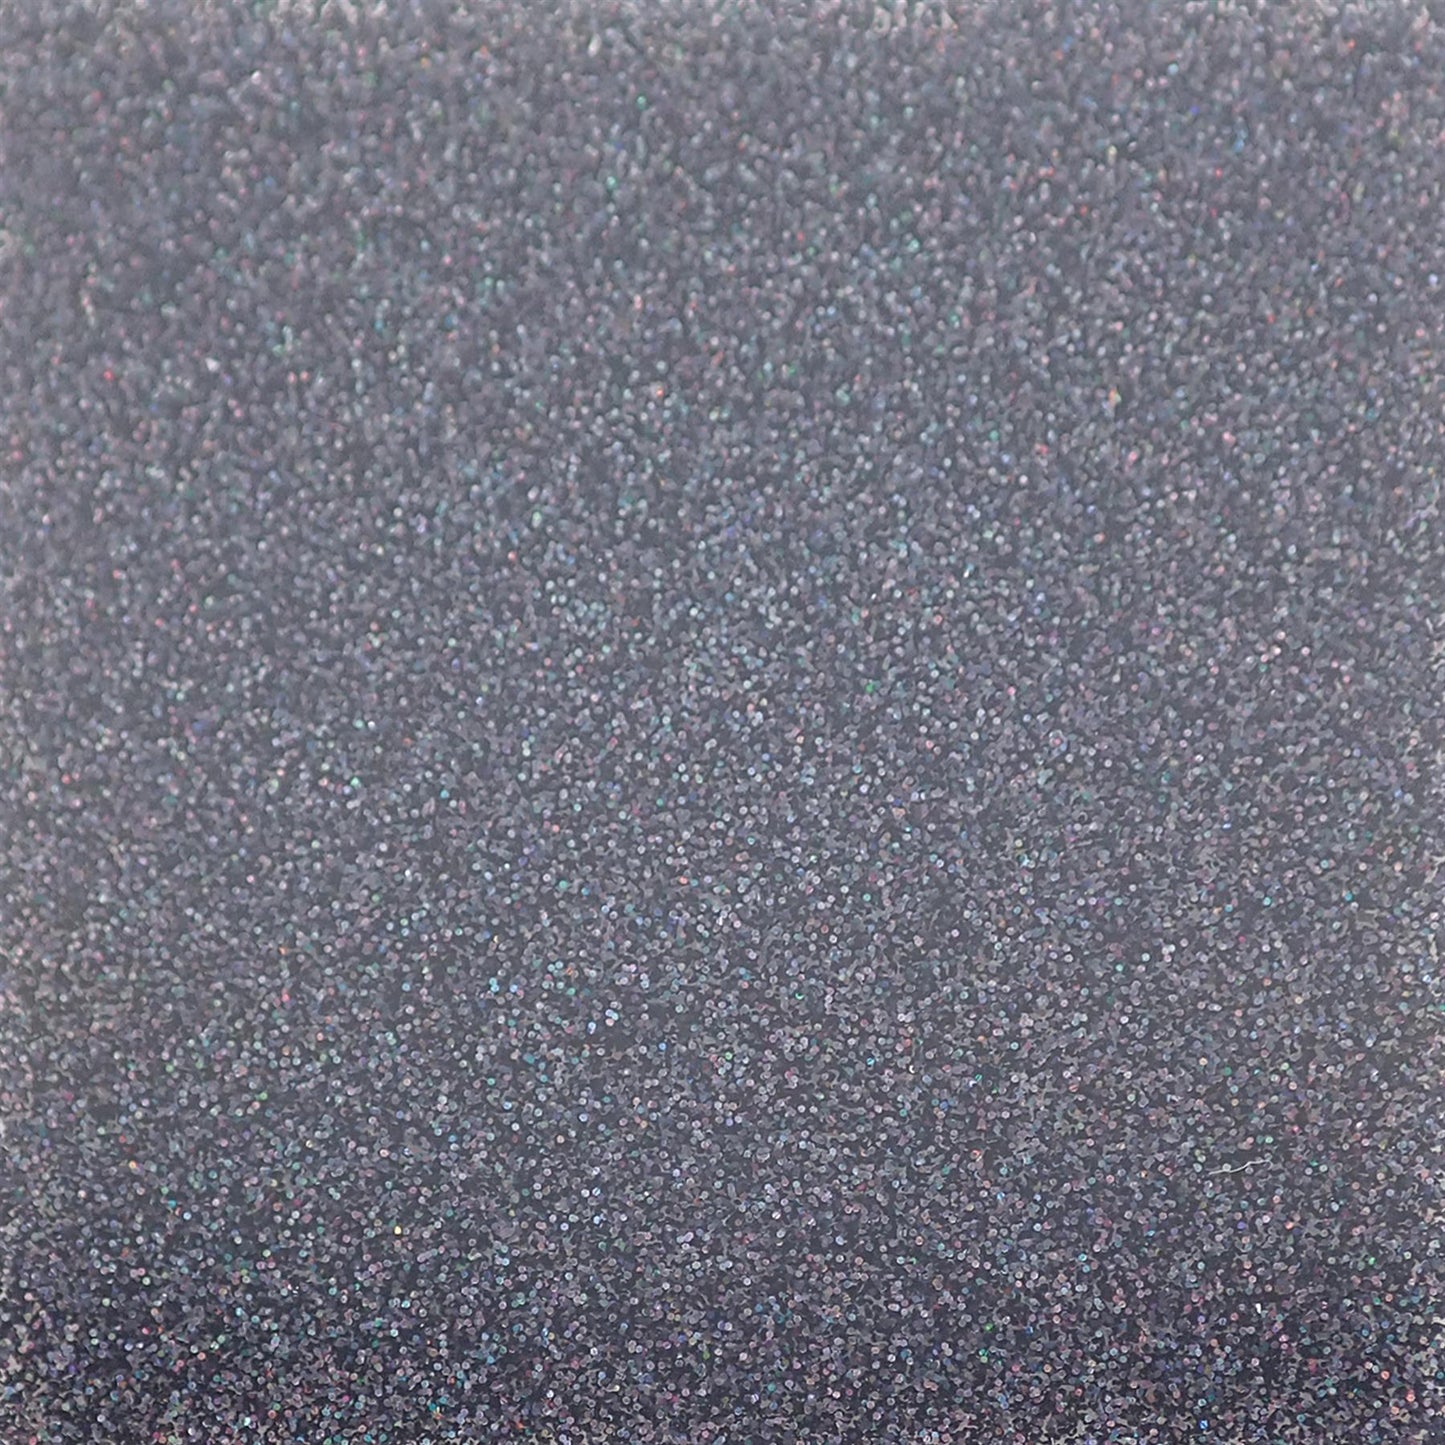 Incudo Black 2-Sided Holographic Glitter Acrylic Sheet - 98x98x3mm (3.9x3.86x0.12"), Sample